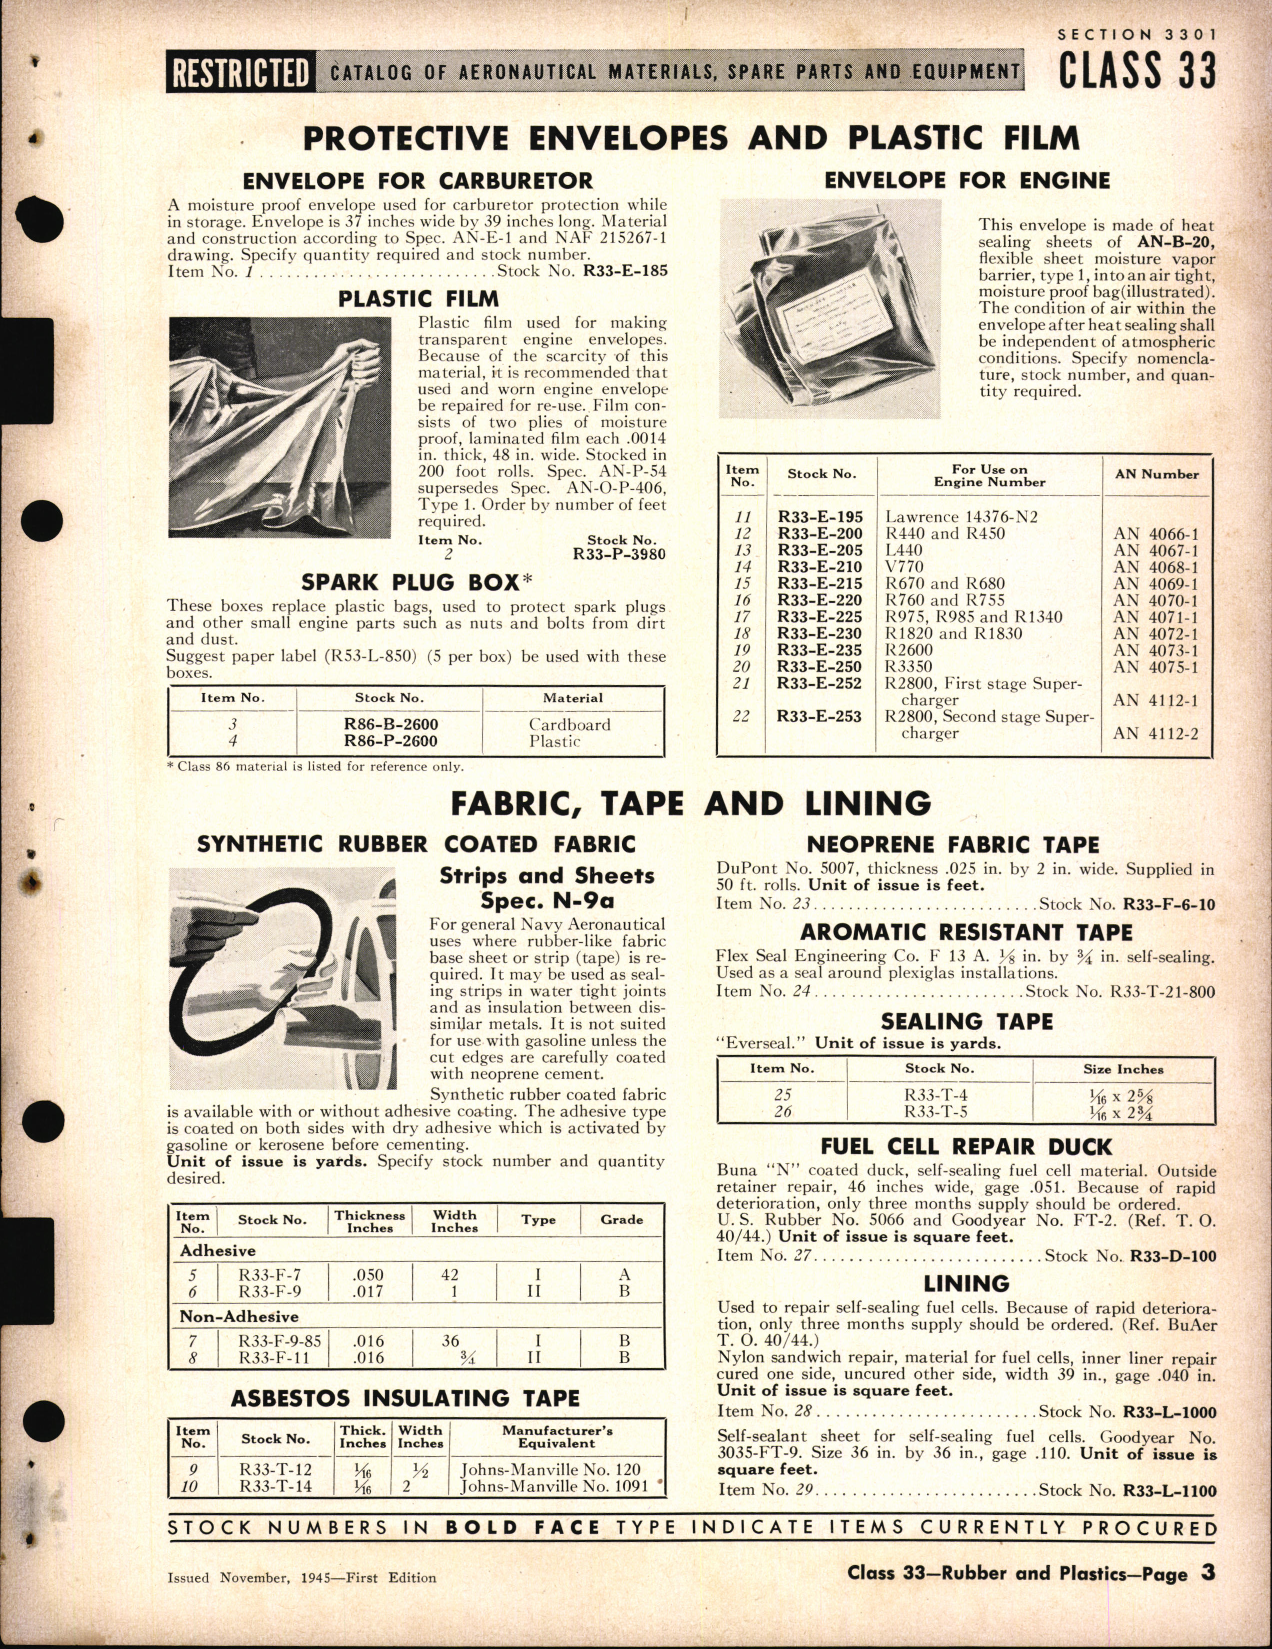 Sample page 5 from AirCorps Library document: Rubber and Plastics